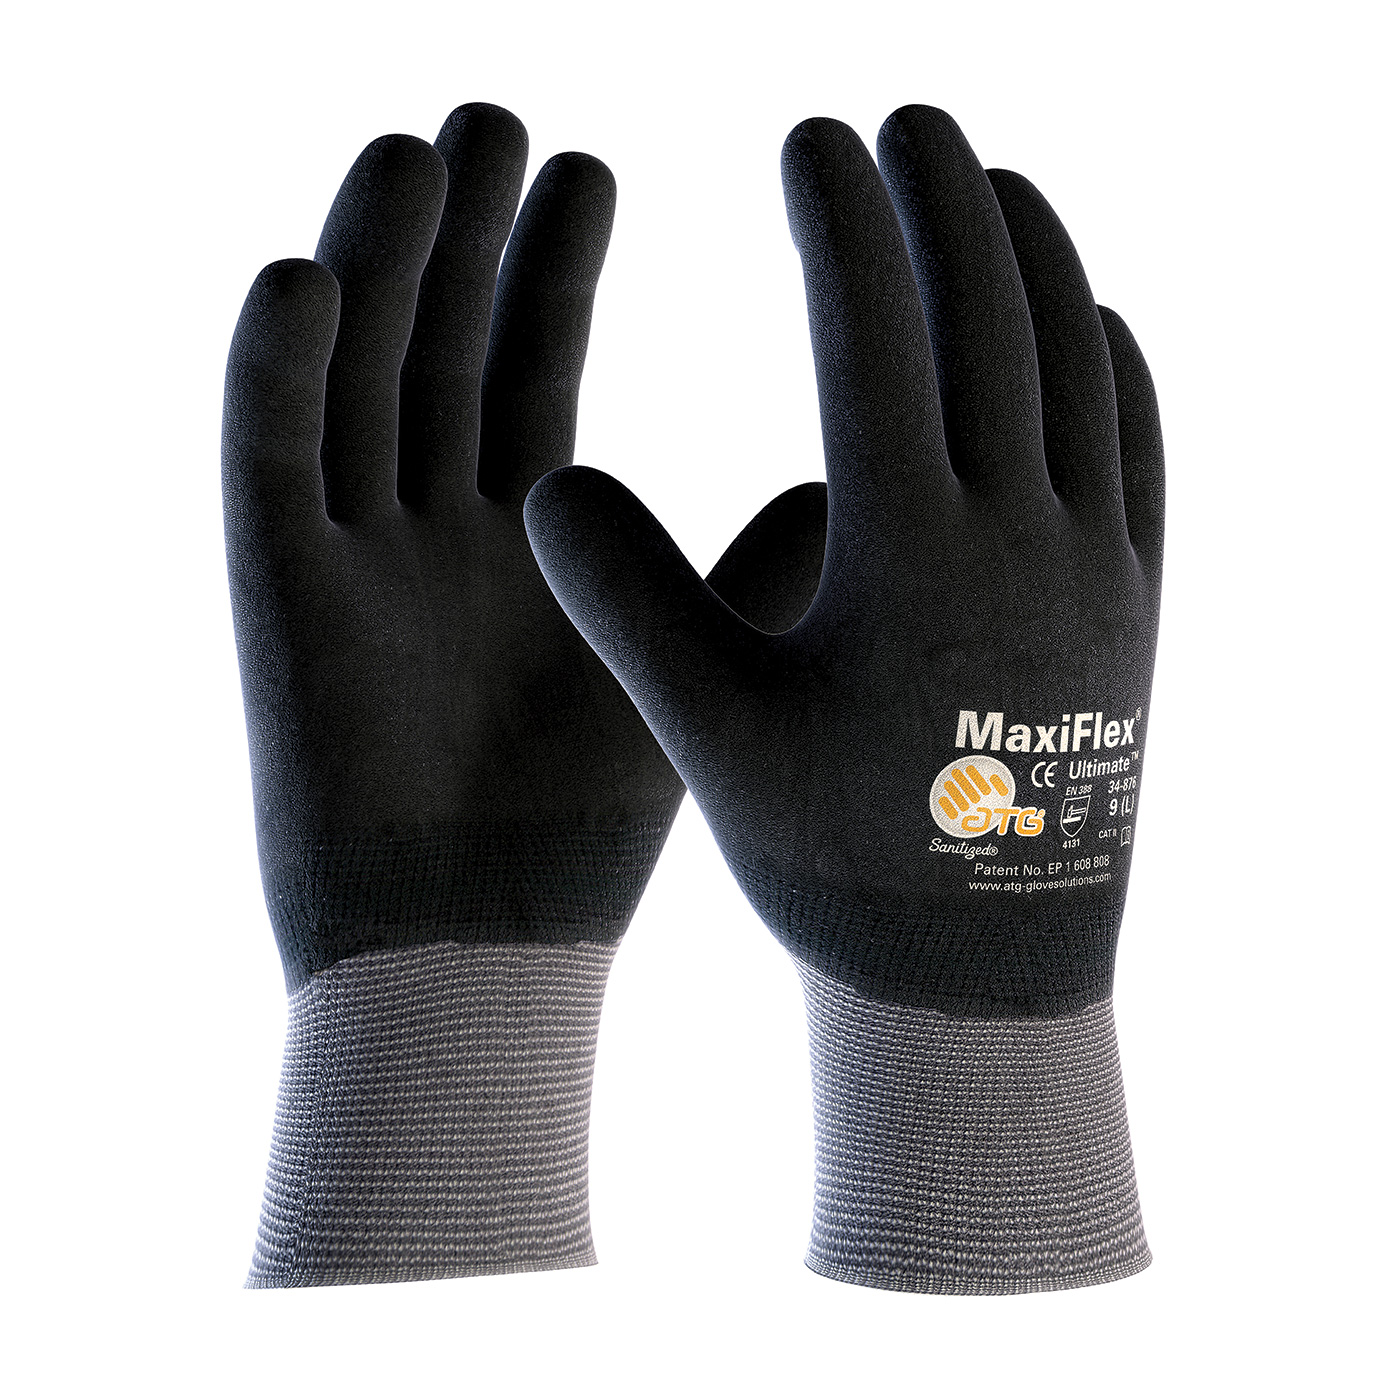 #34-876 PIP® MaxiFlex® Ultimate™ Seamless Knit Nylon / Lycra Glove with Nitrile Coated MicroFoam Grip on Full Hand